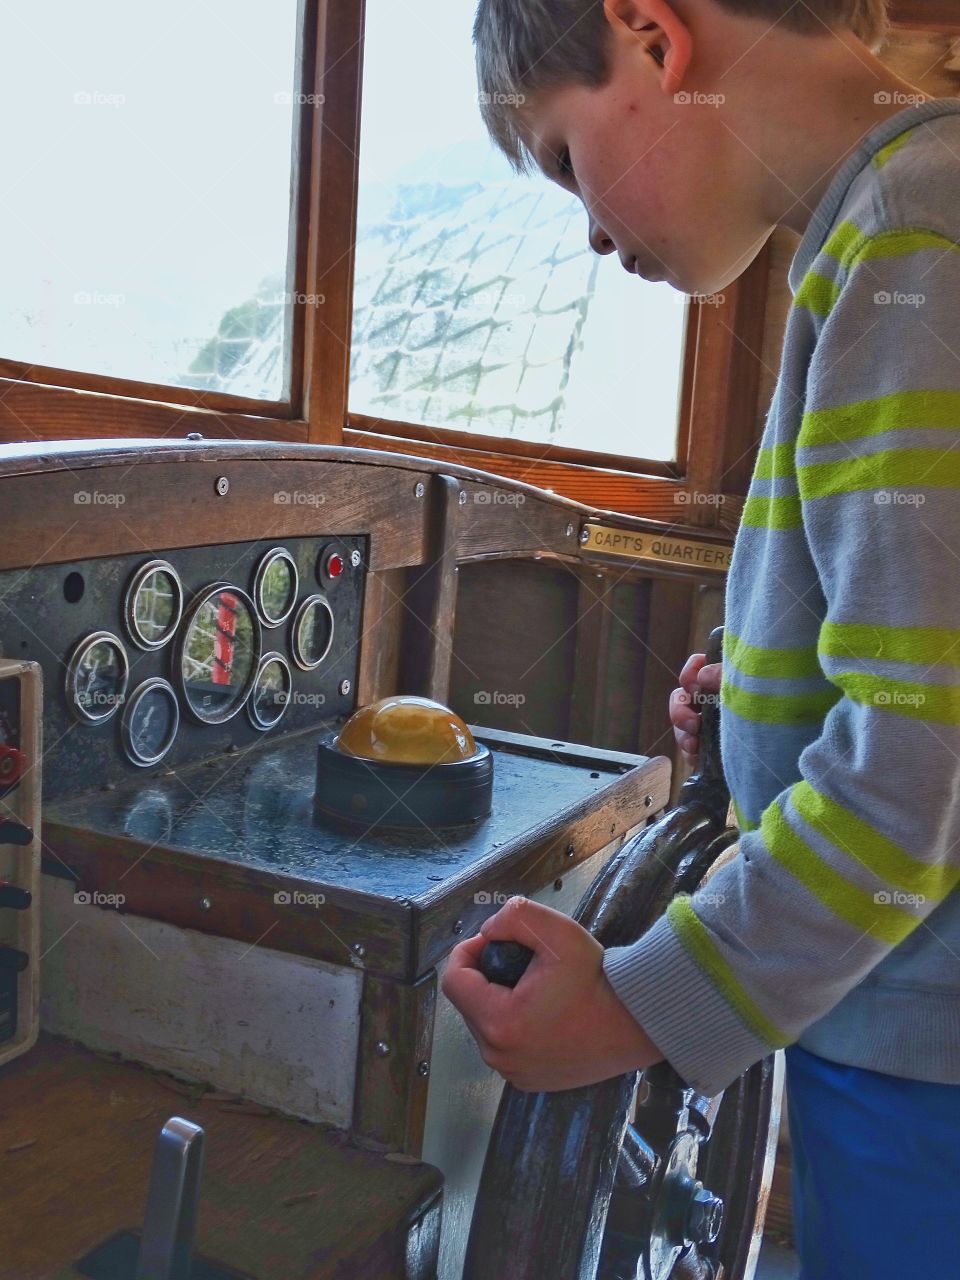 Steering A Boat. Boy Steering A Boat By Compass
